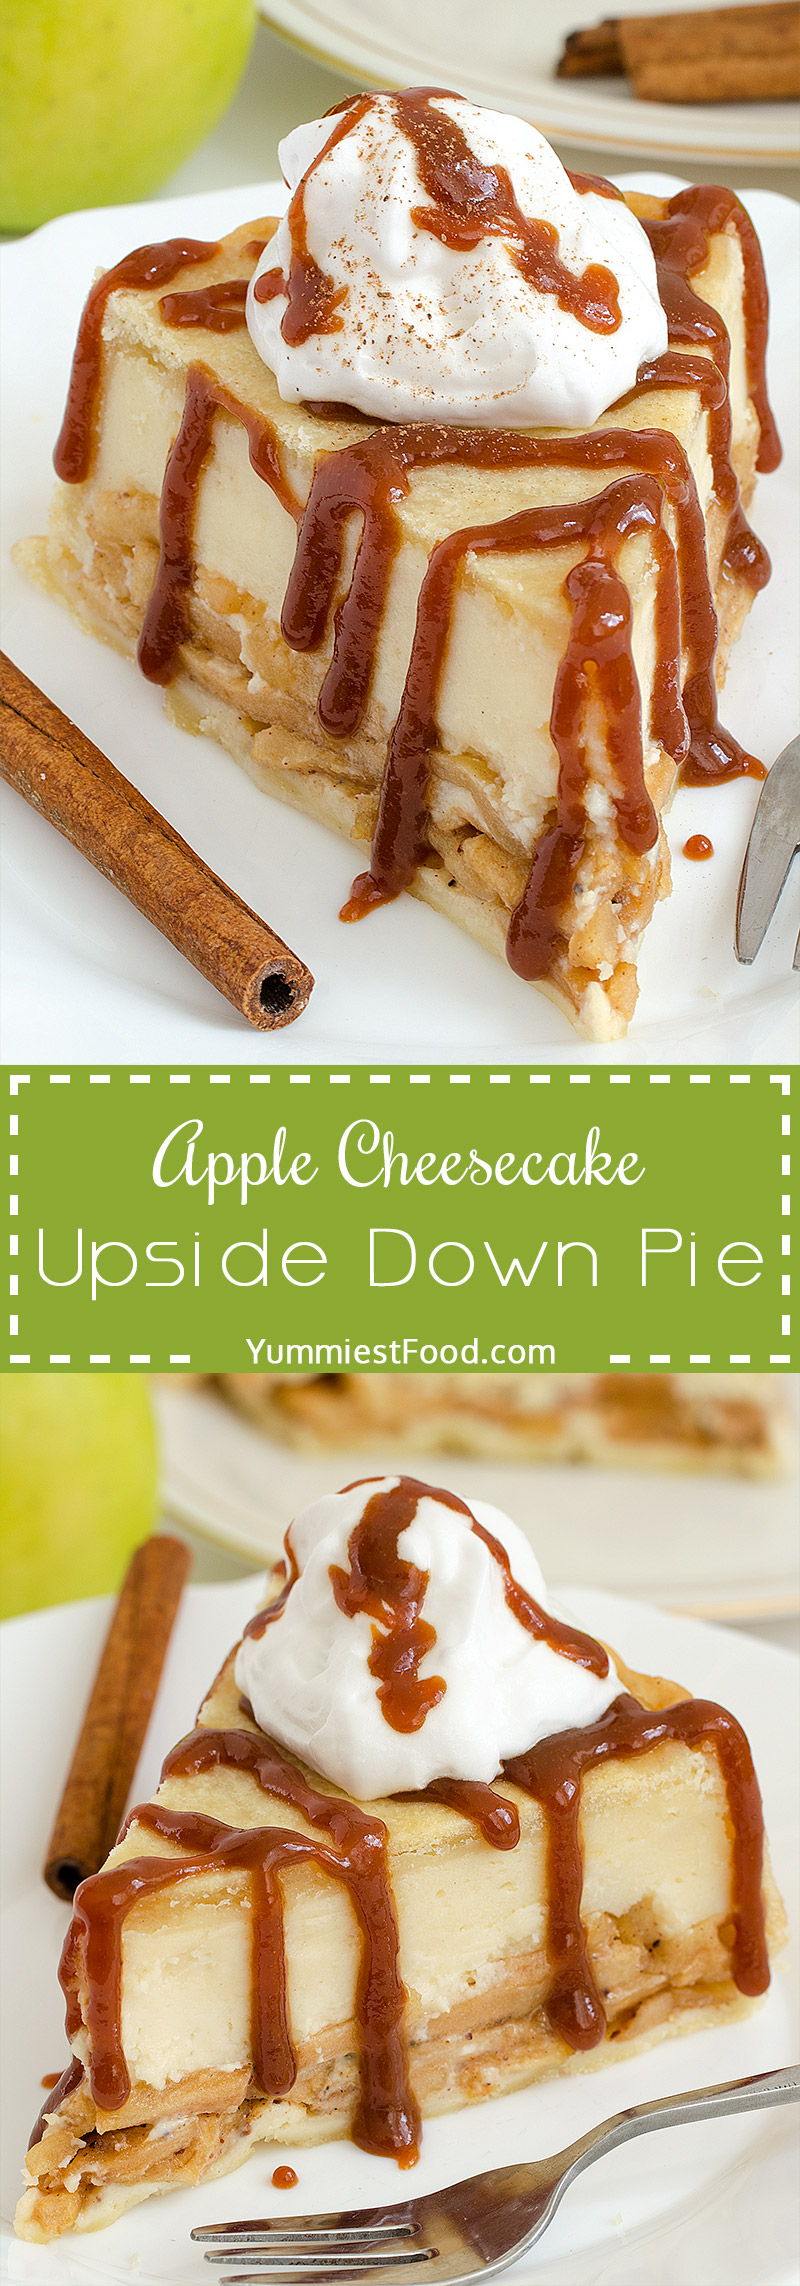 Very delicious and tasty Apple Cheesecake Upside Down Pie